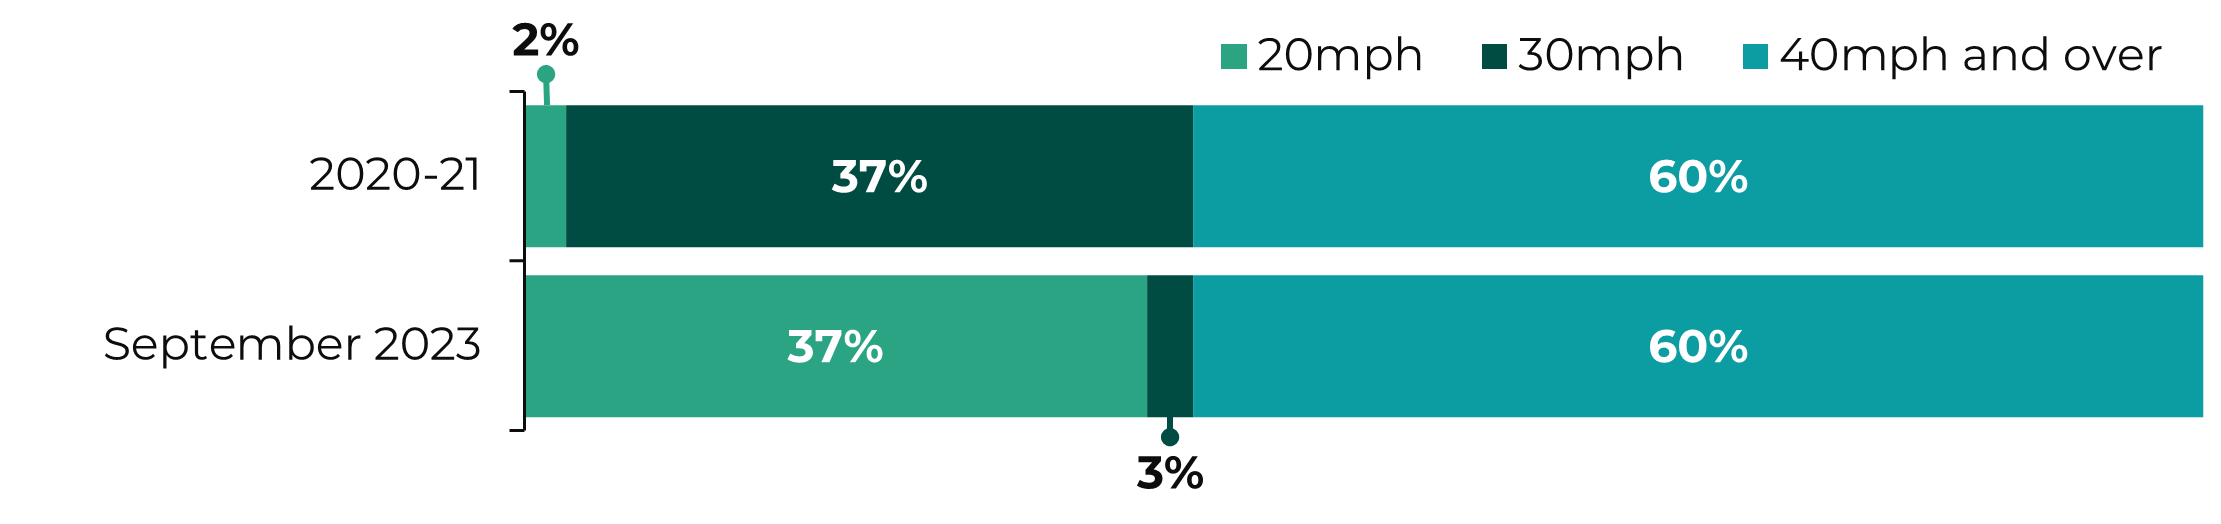 A chart showing Welsh road lengths by speed limit before and after the introduction of default 20mph on restricted roads. The chart shows that following the change, 63% of Welsh roads by length are 30mph or higher, compared to 97% before. For restricted roads, there were 37% of all roads by length at 30mph before the change, moving to 37% at 20mph following the change.